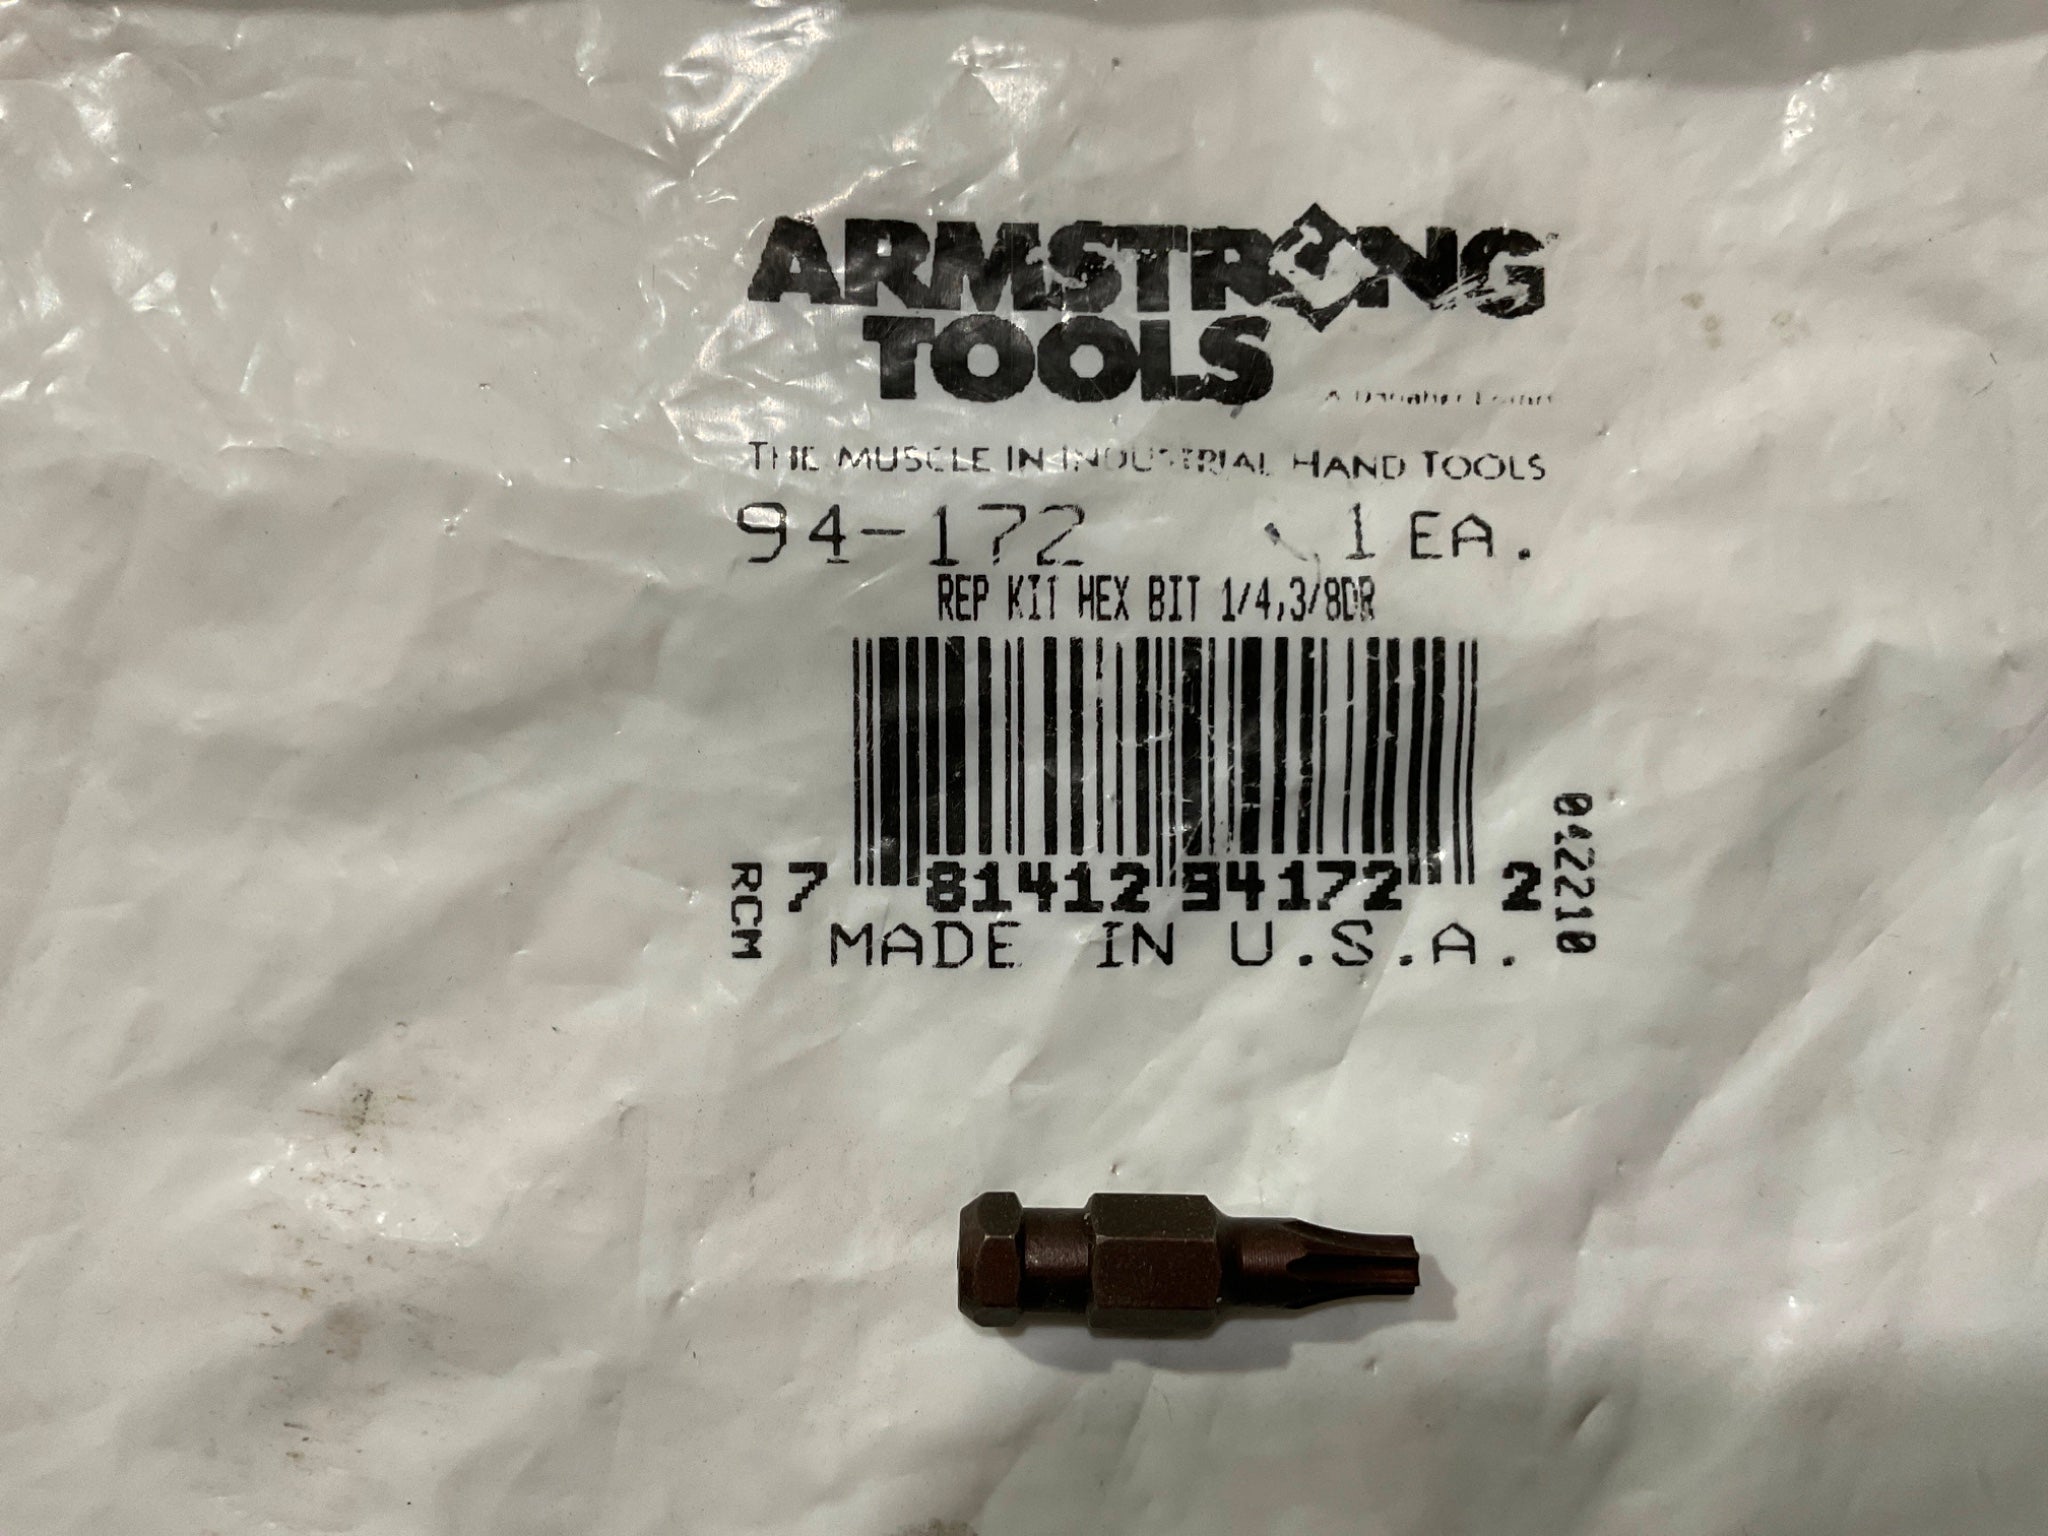 Armstrong 94-177 Rep Kit Hex Bit 1/4,3/8Dr T15 USA